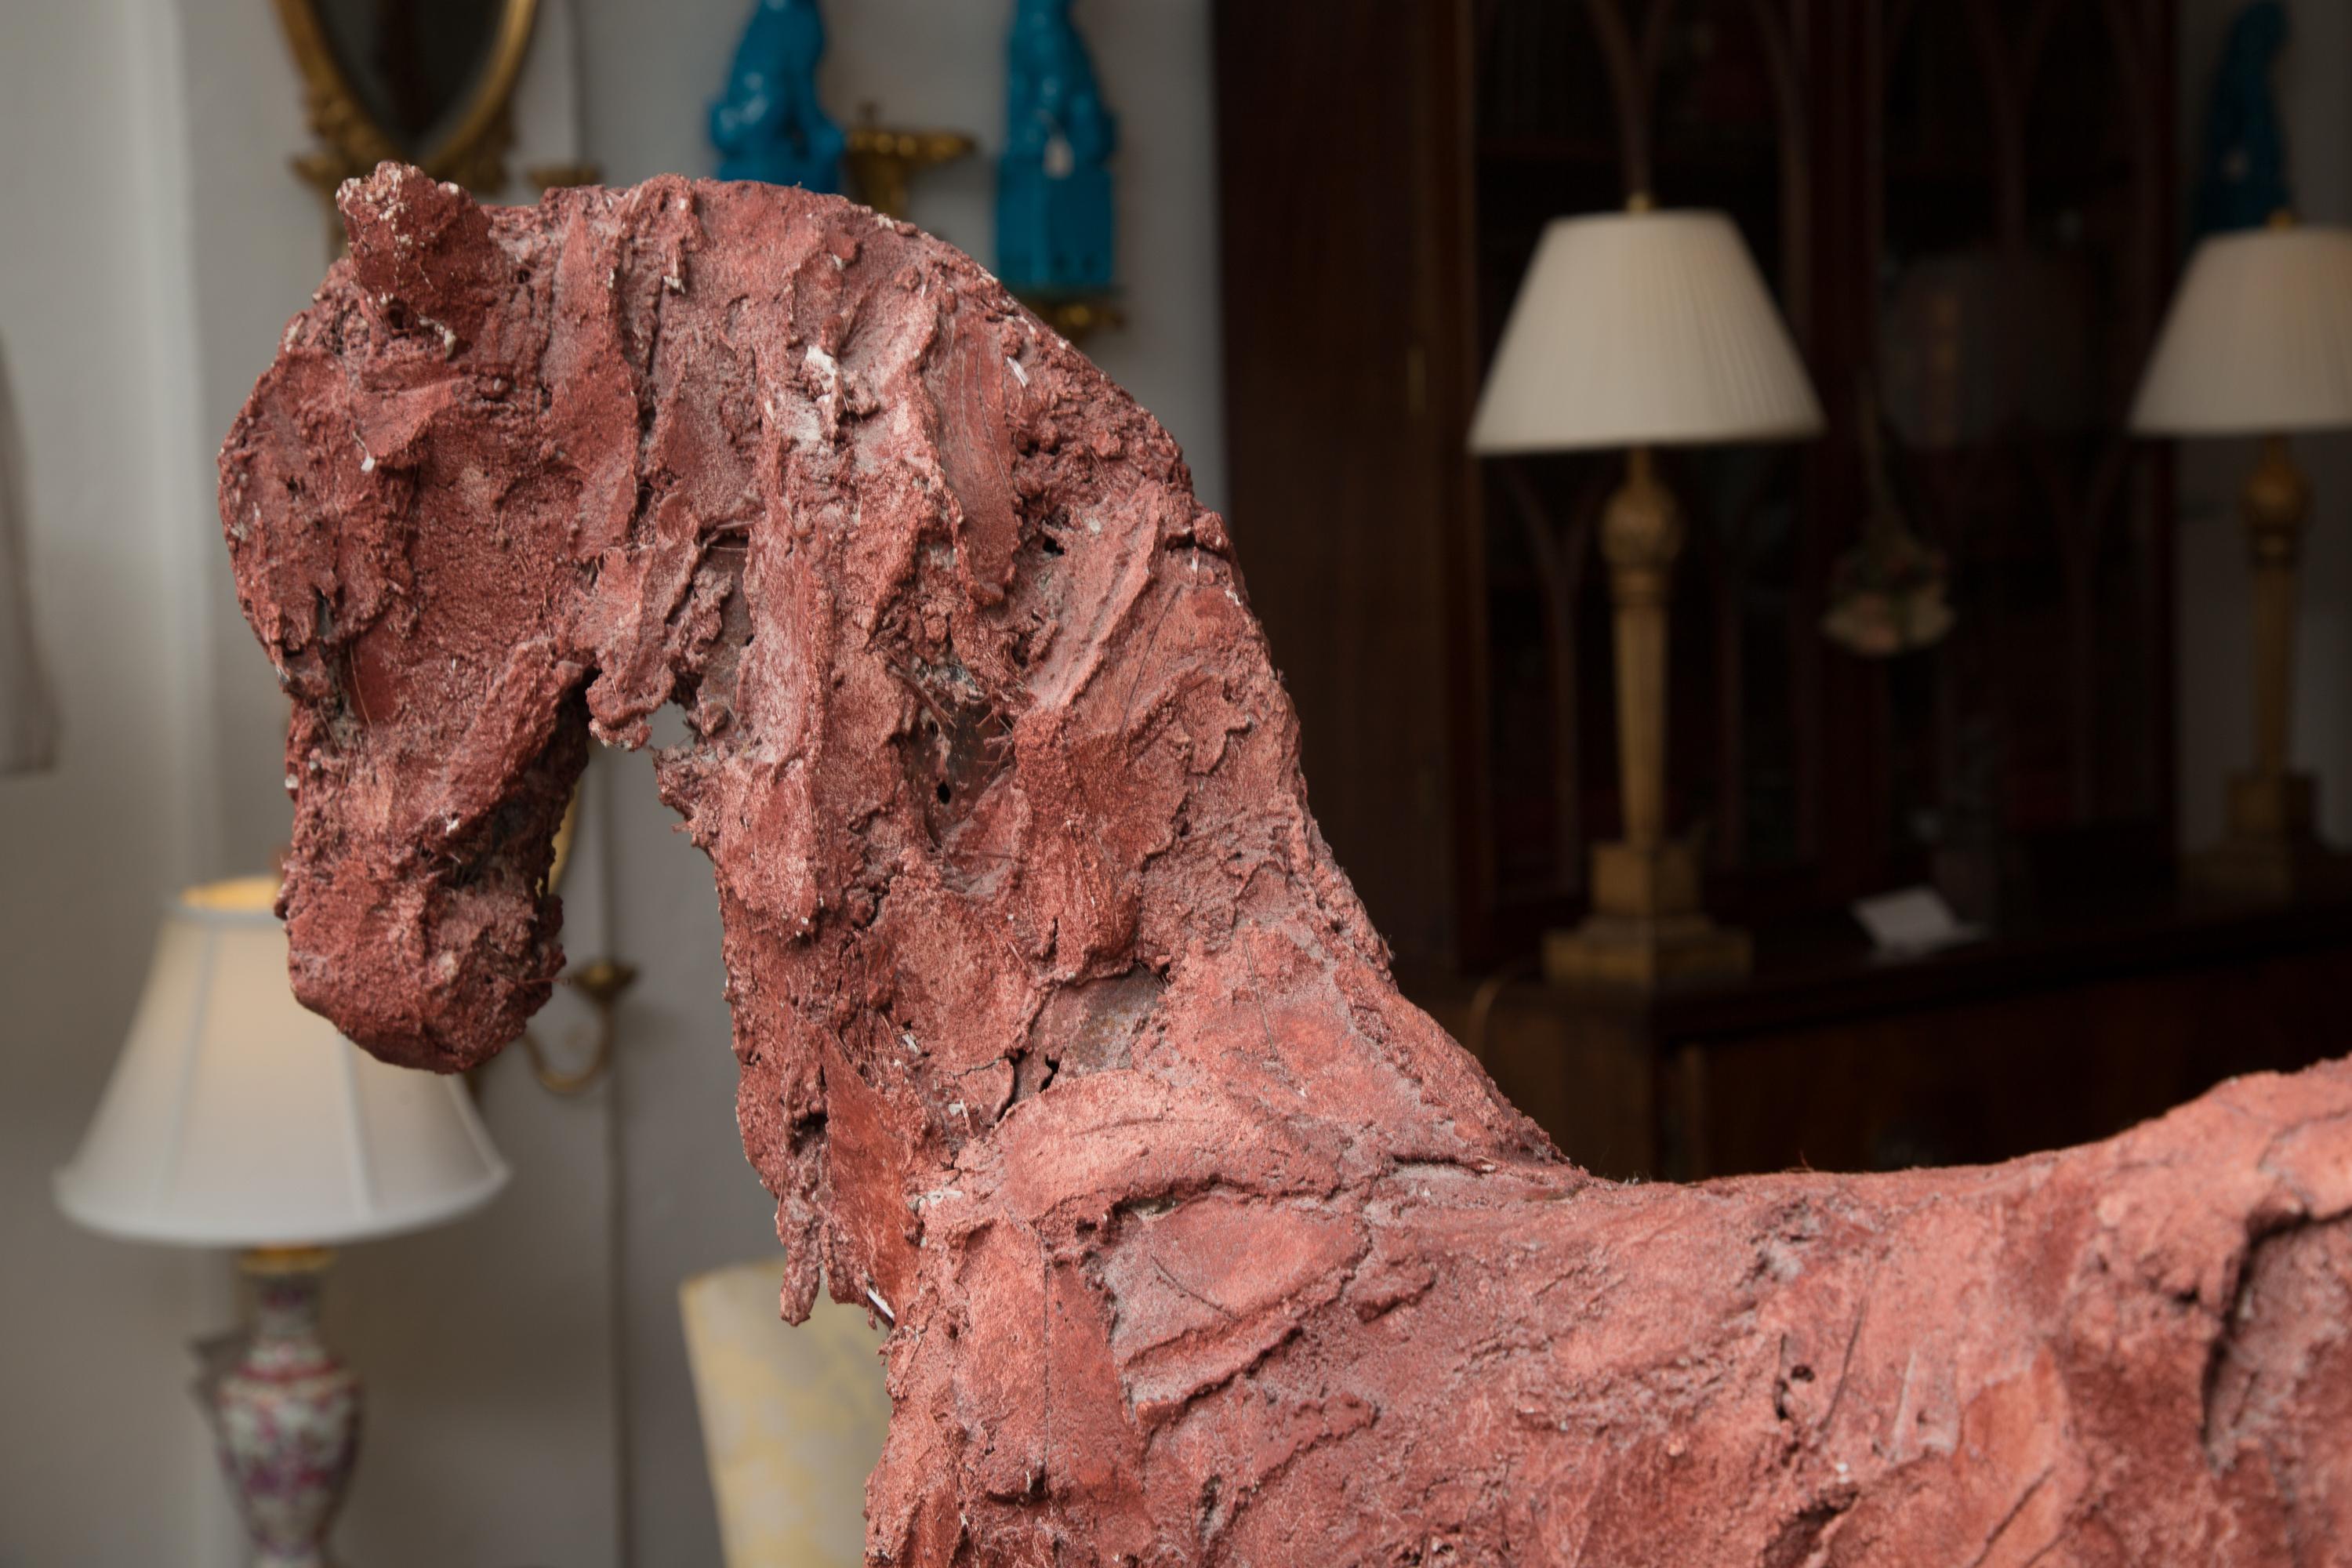 Midcentury Plaster Figure of a Stately Horse by Siri Hollander, Sculpture (Sonstiges)